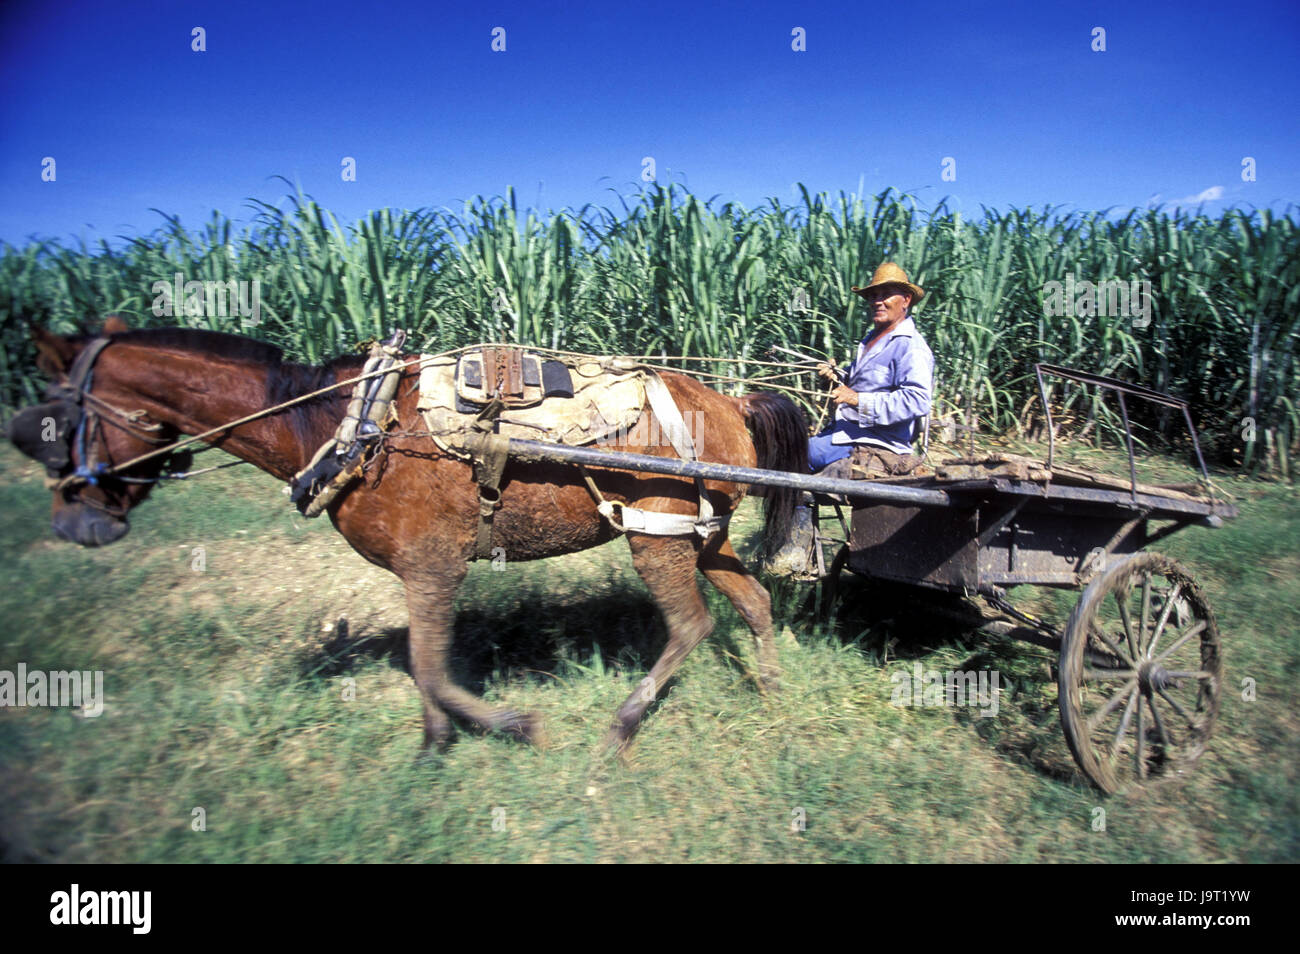 Cuba,Cueto,sugarcane plantation,farmer,horse and cart,no model release,Central America,plantation,annex,sugarcane,Cuban,local,boss,straw hat,cart,horse's motorcycle combination,work,agriculture,outside, Stock Photo